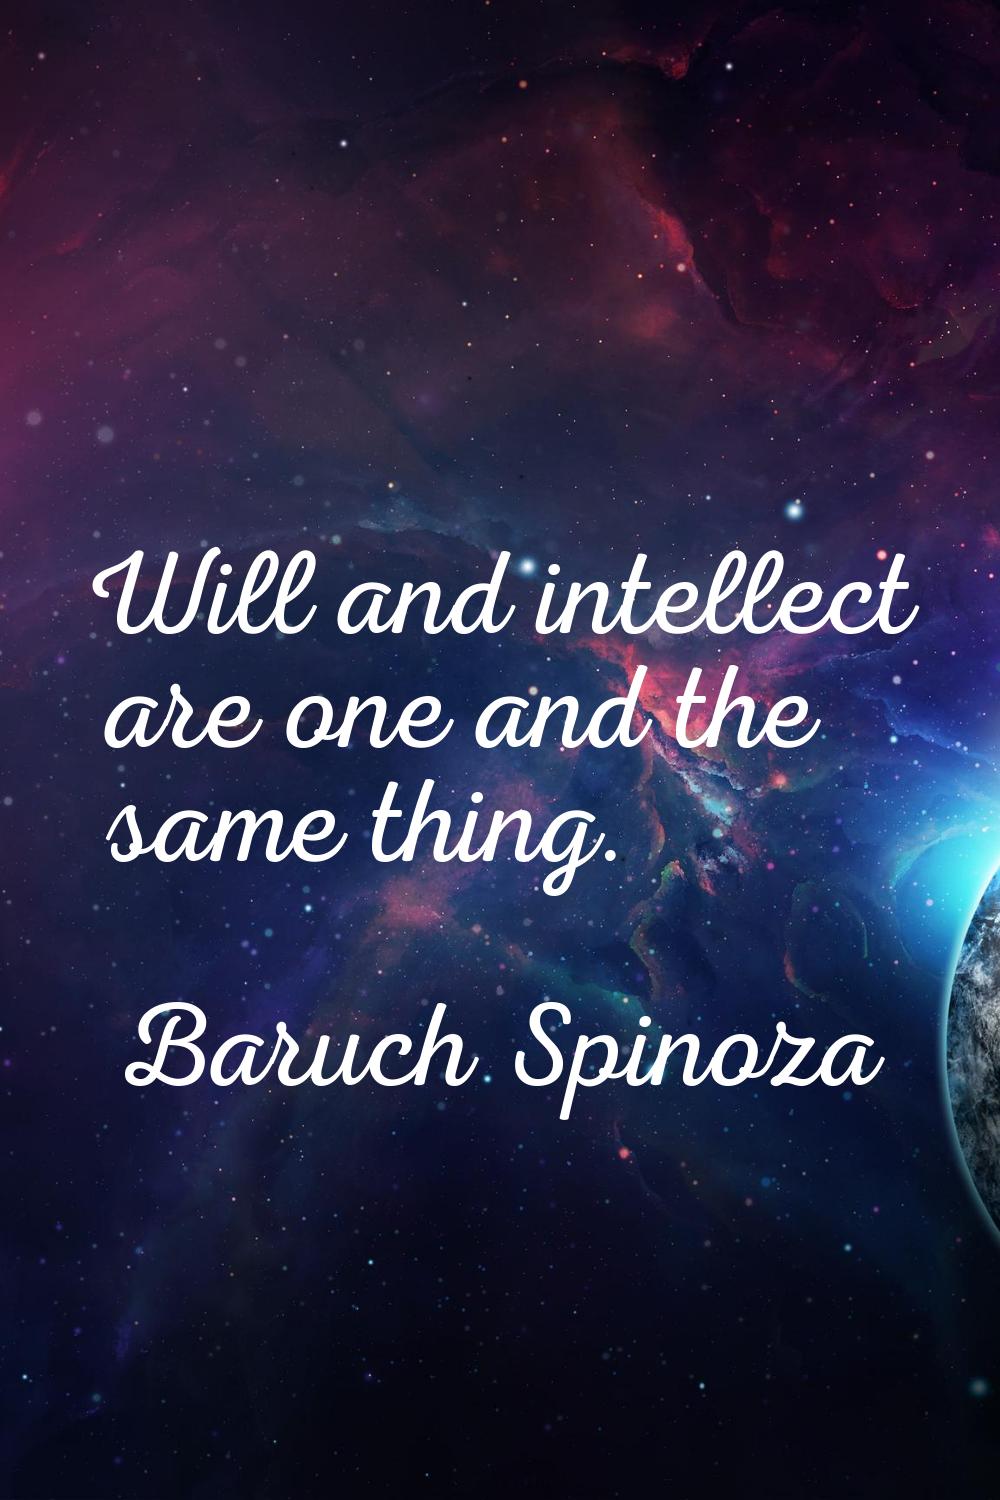 Will and intellect are one and the same thing.